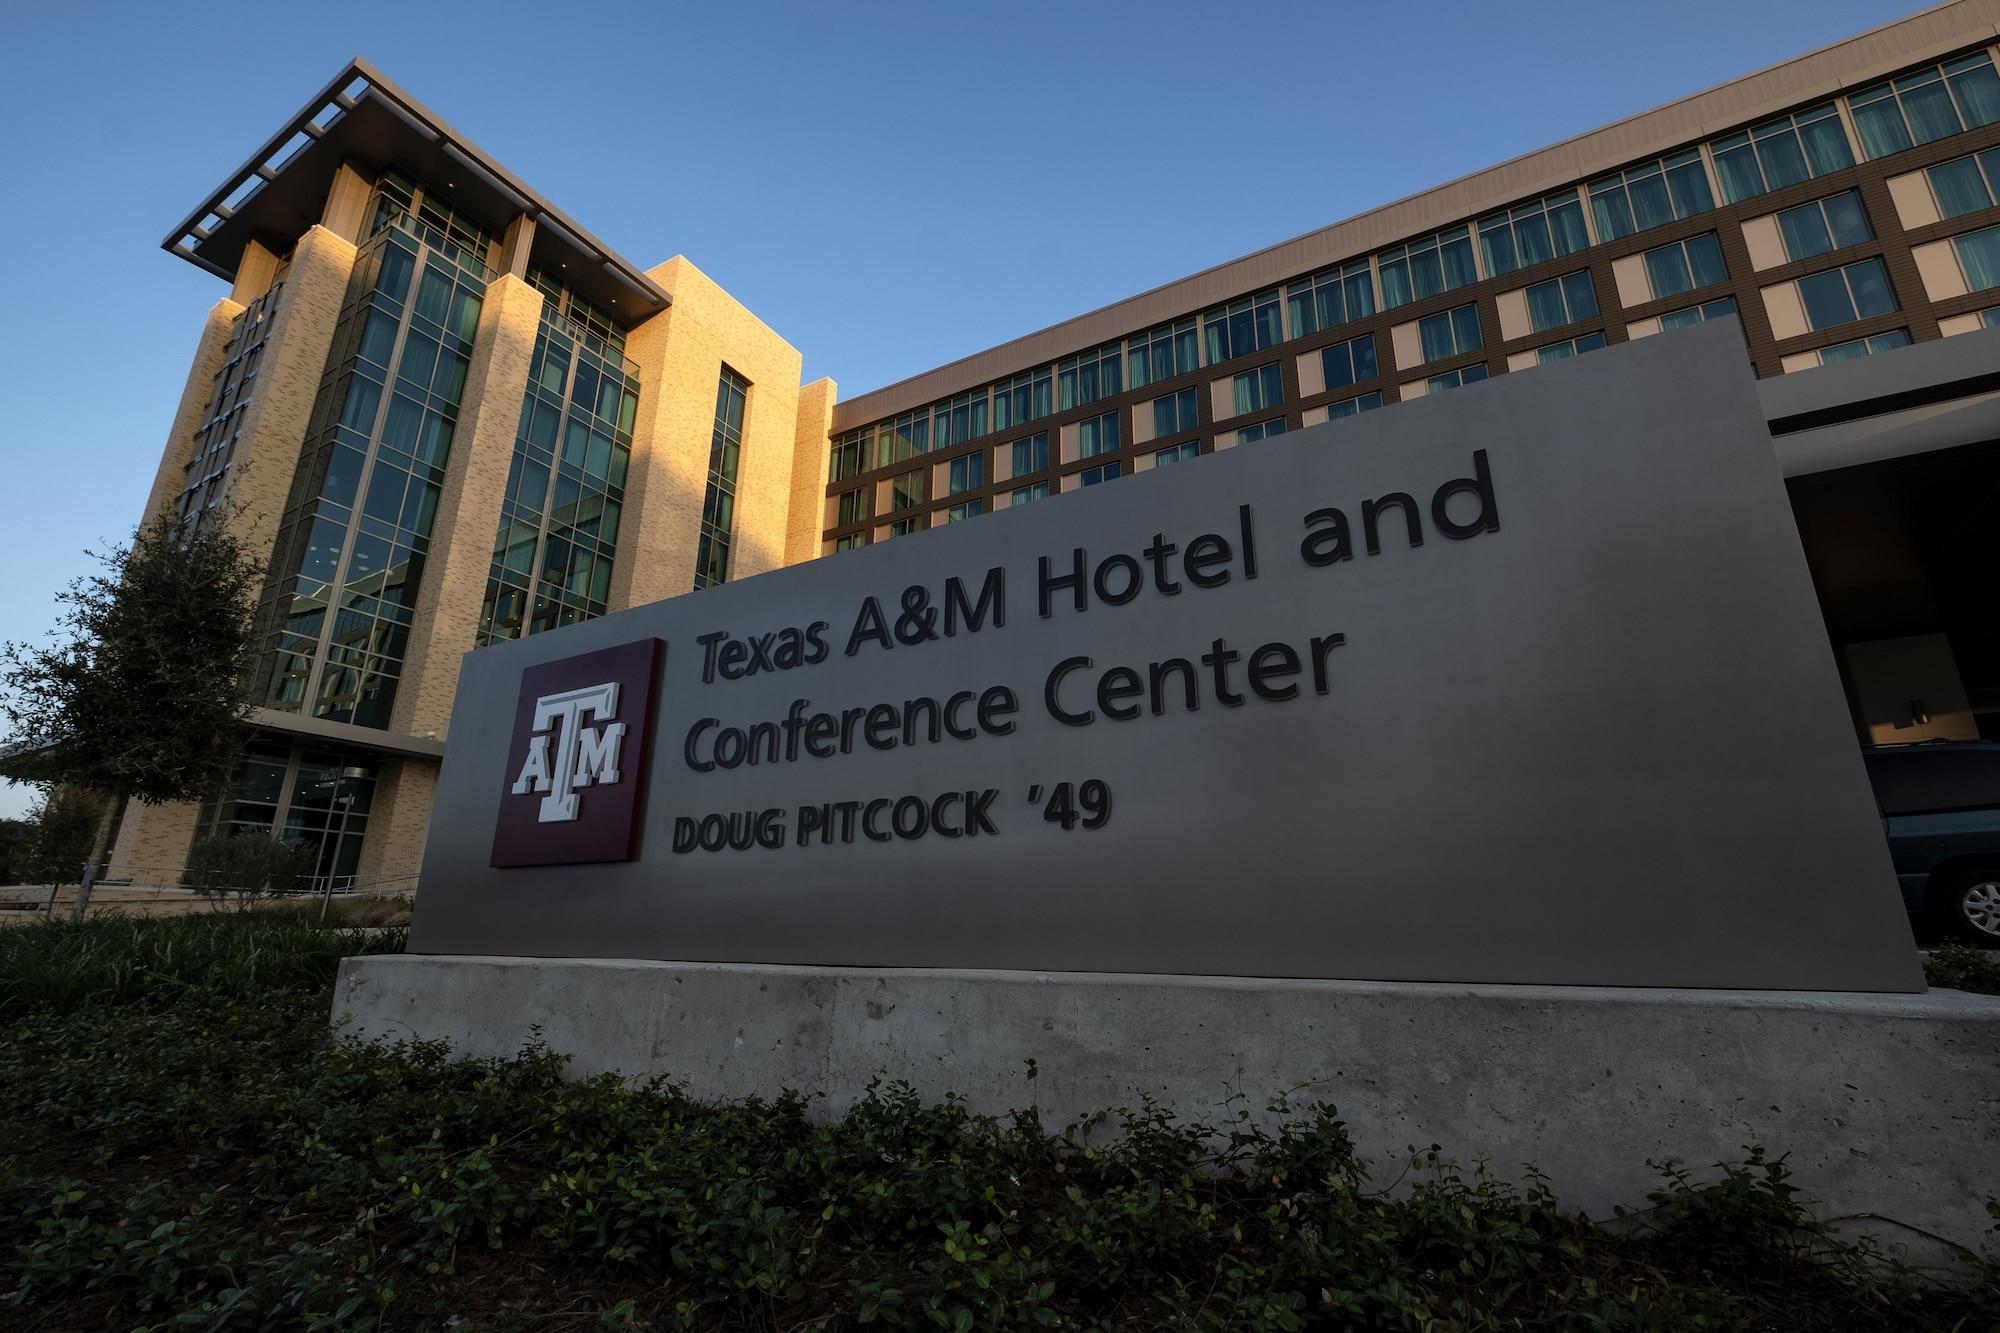 Texas A&M Hotel and Conference Center image